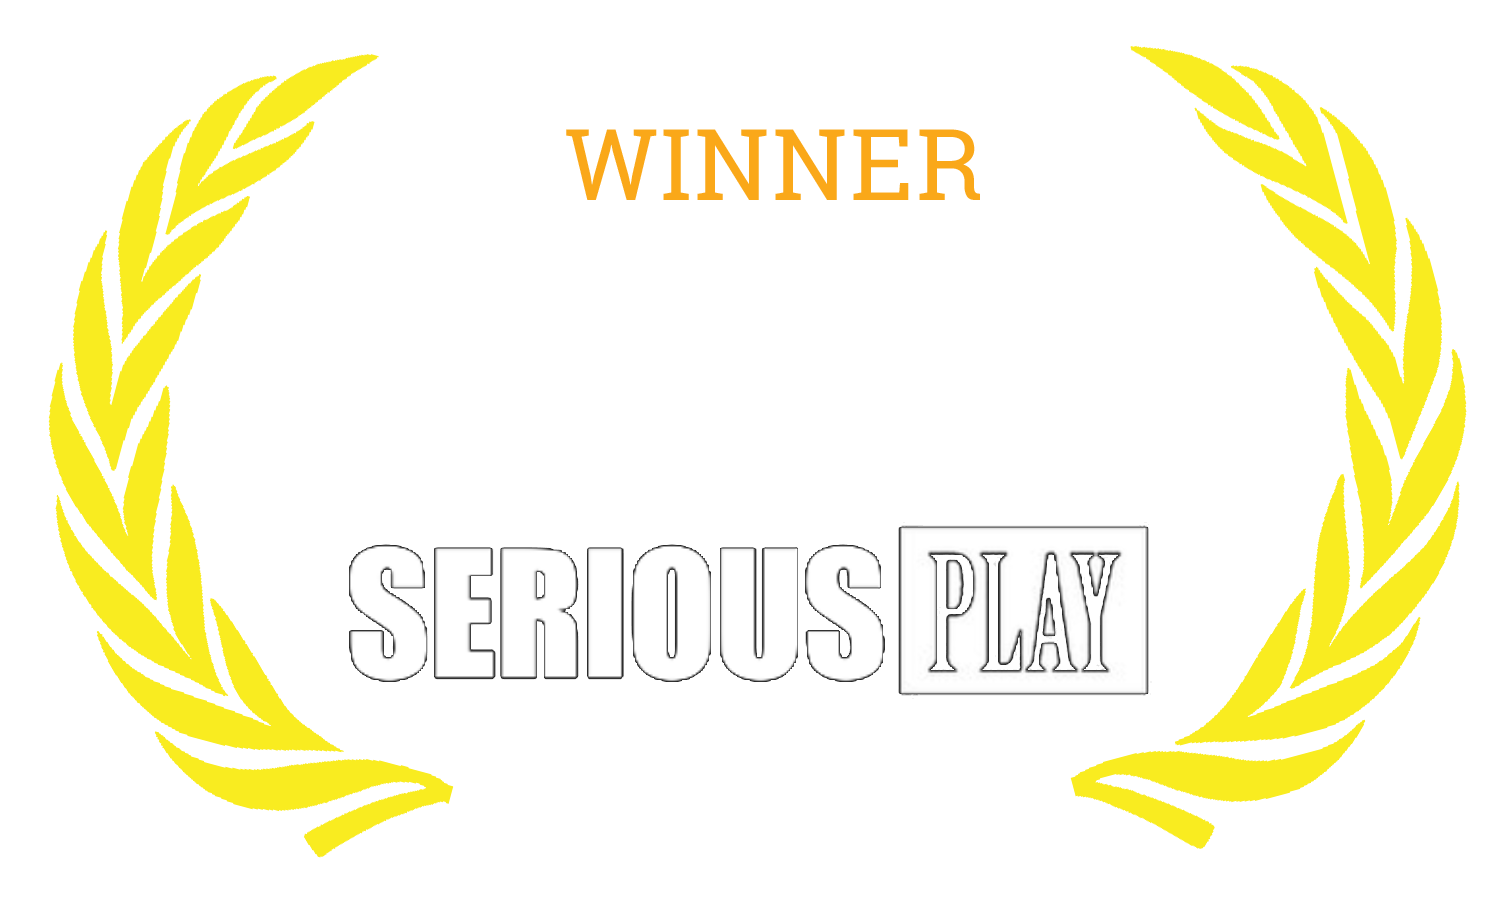 Headliner: NoviNews 'Games for Good' Silver Award Serious Play Conference, 2019